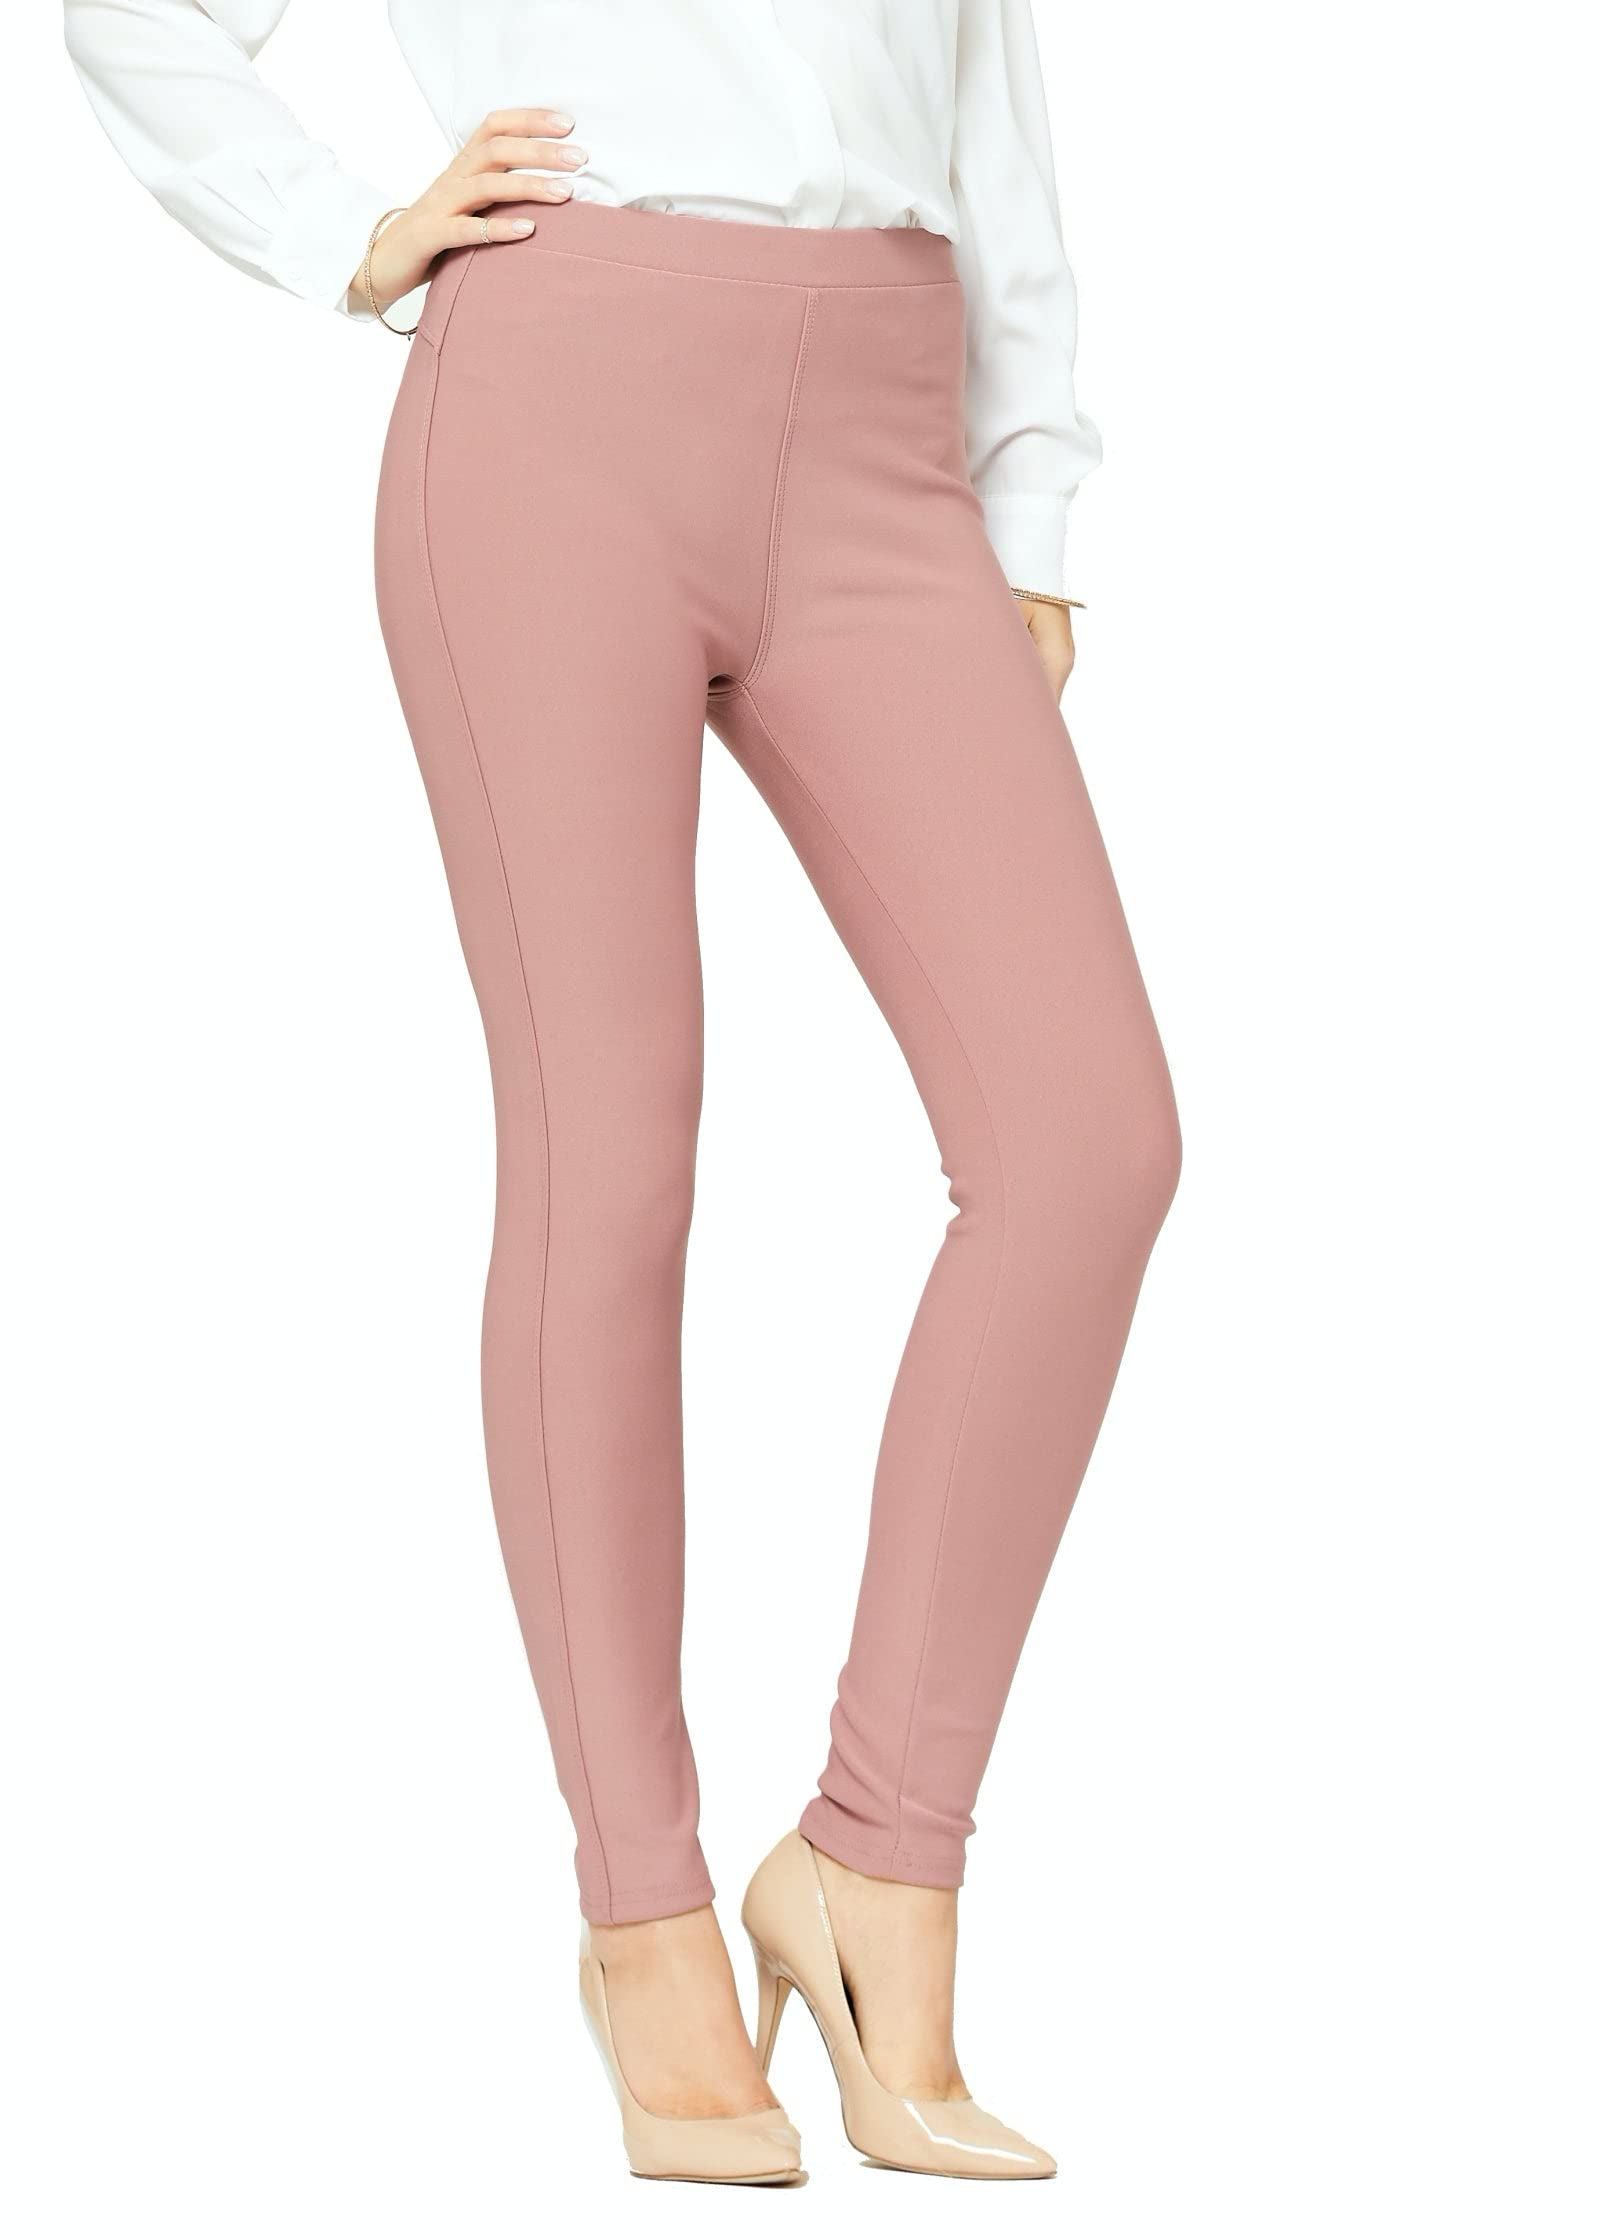 Conceited Premium Womens Stretch Ponte Pants - Dressy Leggings With Butt  Lift - Classic - Dusty Pink - Small-Medium